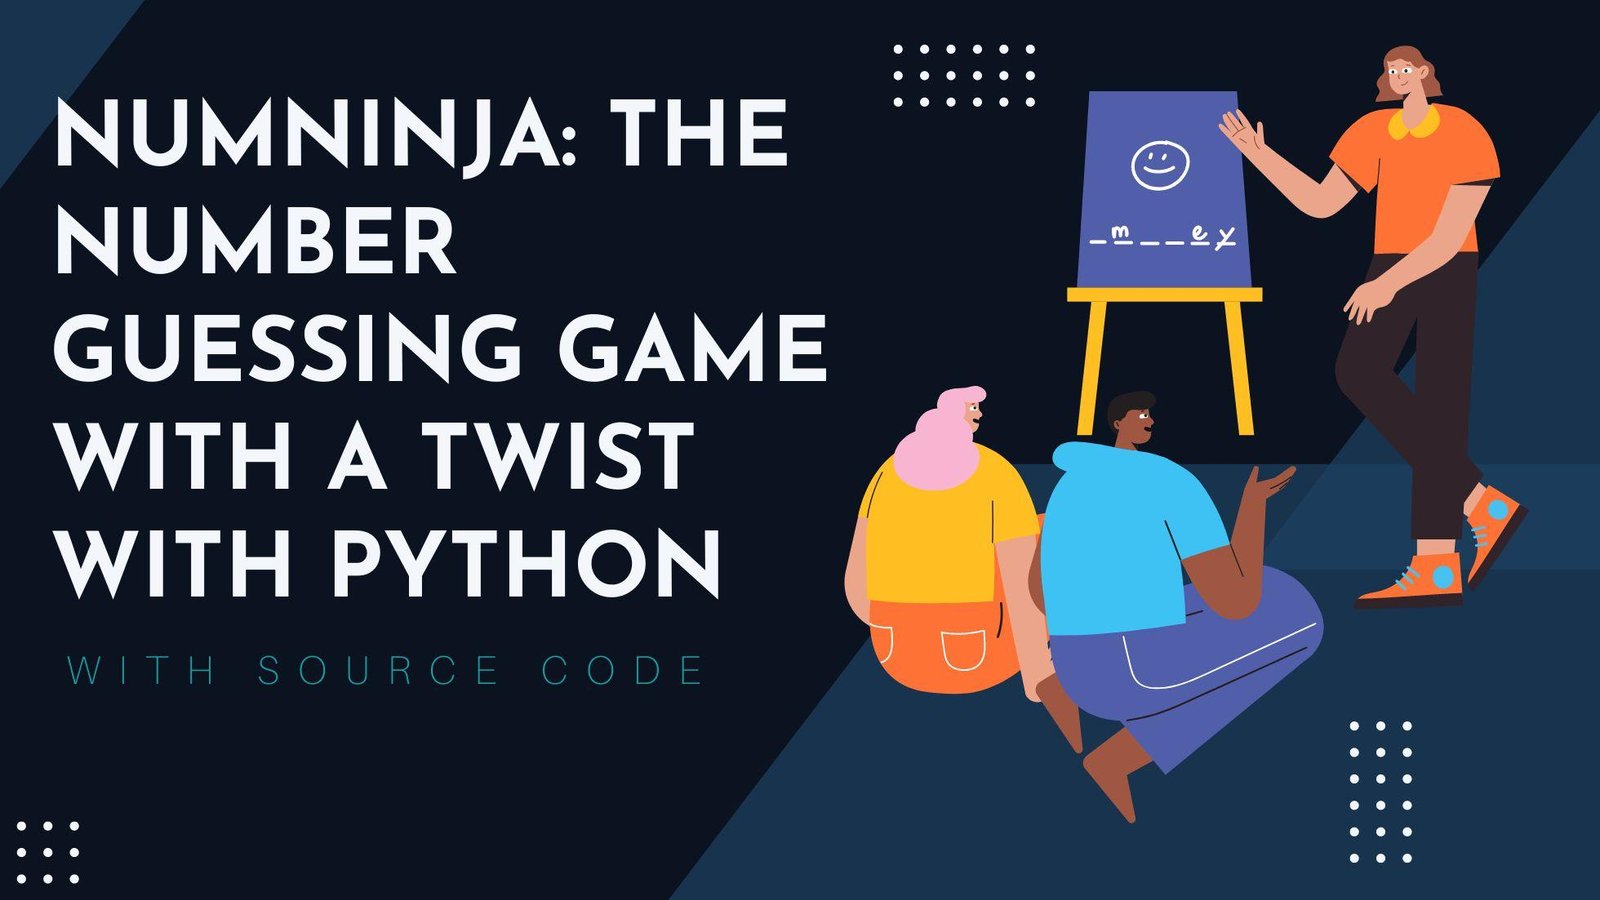 NumNinja: The Number Guessing Game with a Twist with Python